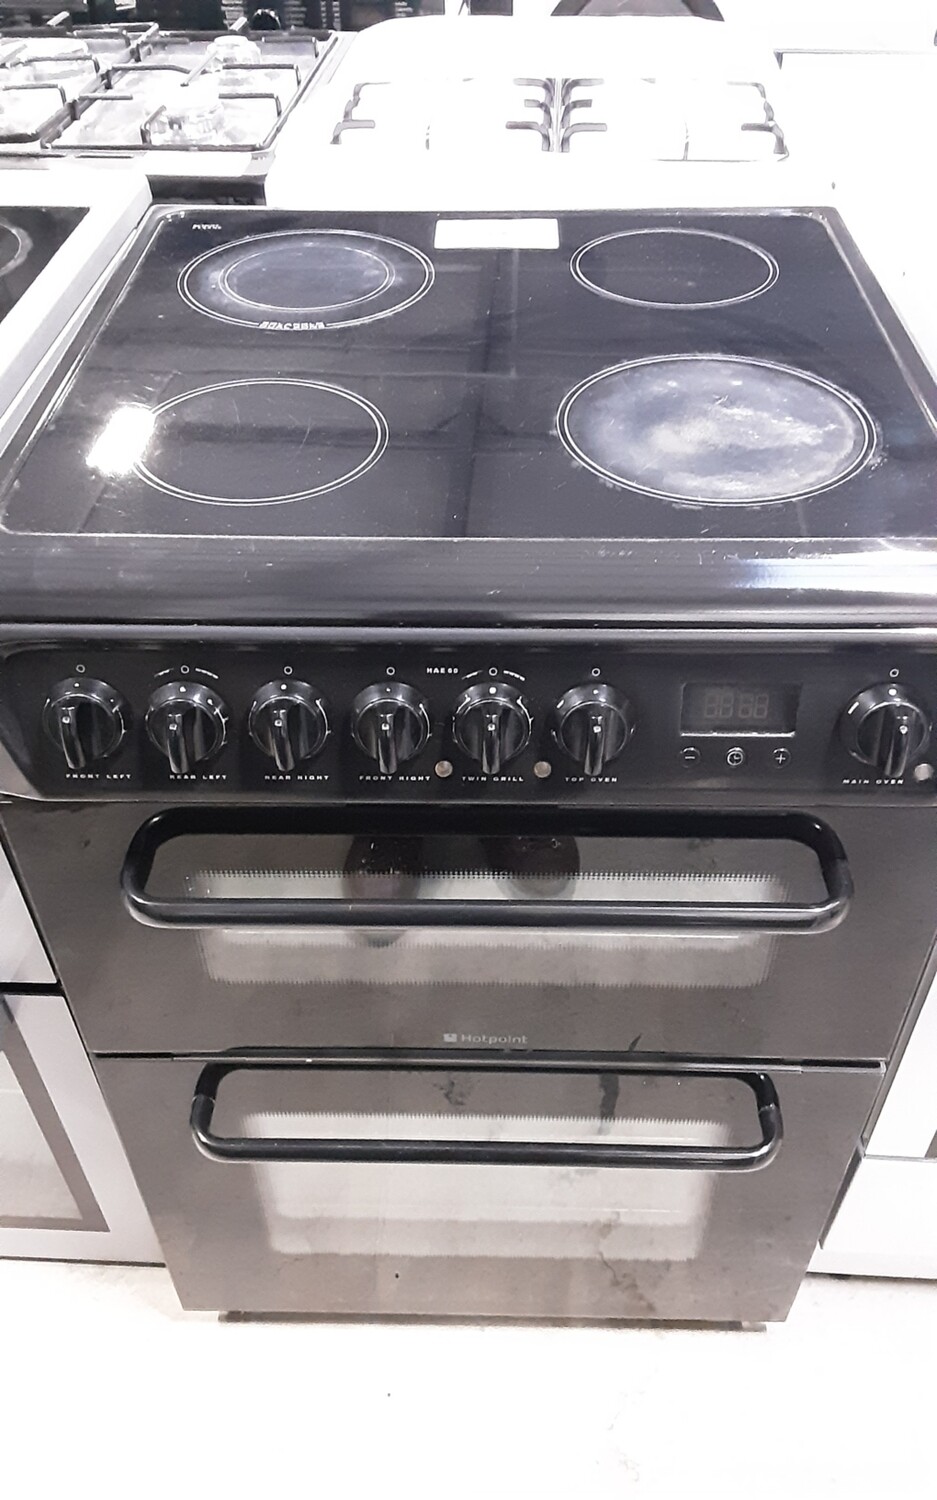 Hotpoint 60cm Electric cooker Twin Cavity Ceramic Hob - Black  - Refurbished + 6 month guarantee 